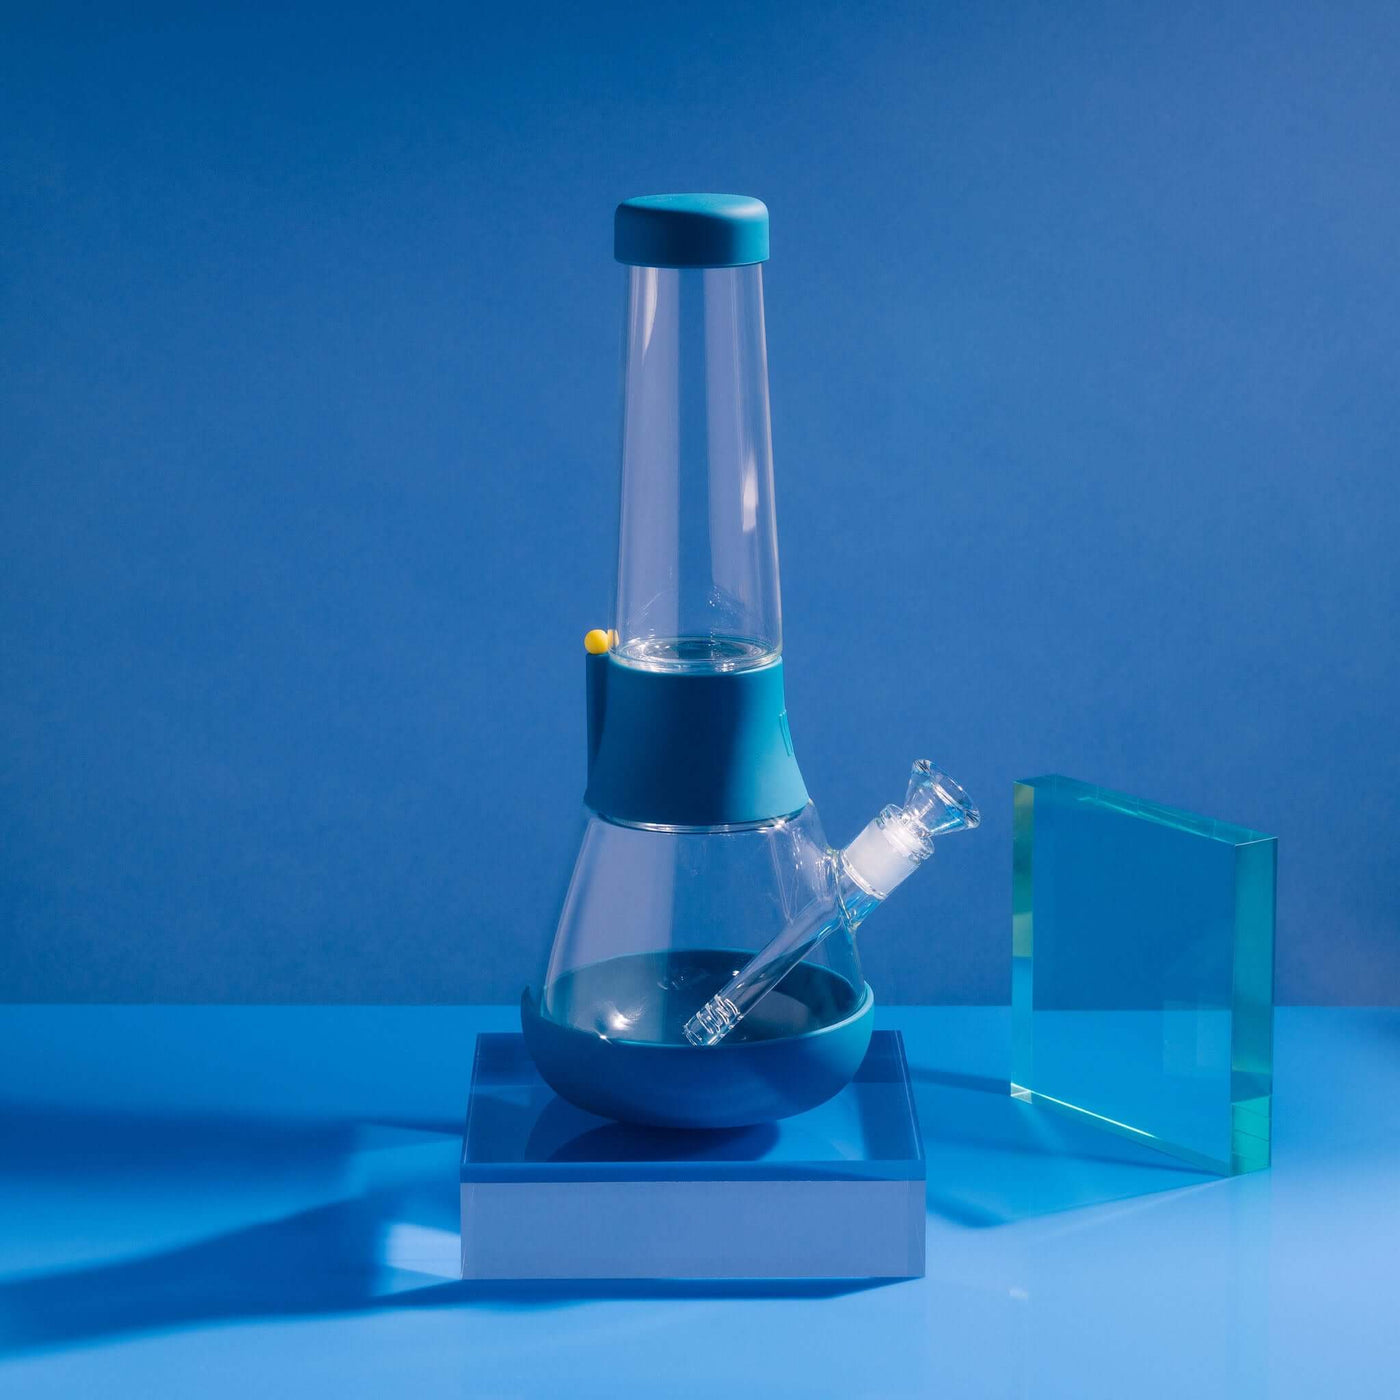 Product photo of sleek glass bong on midnight blue cover in a blue setting, with glowy acrylic glass beside it.